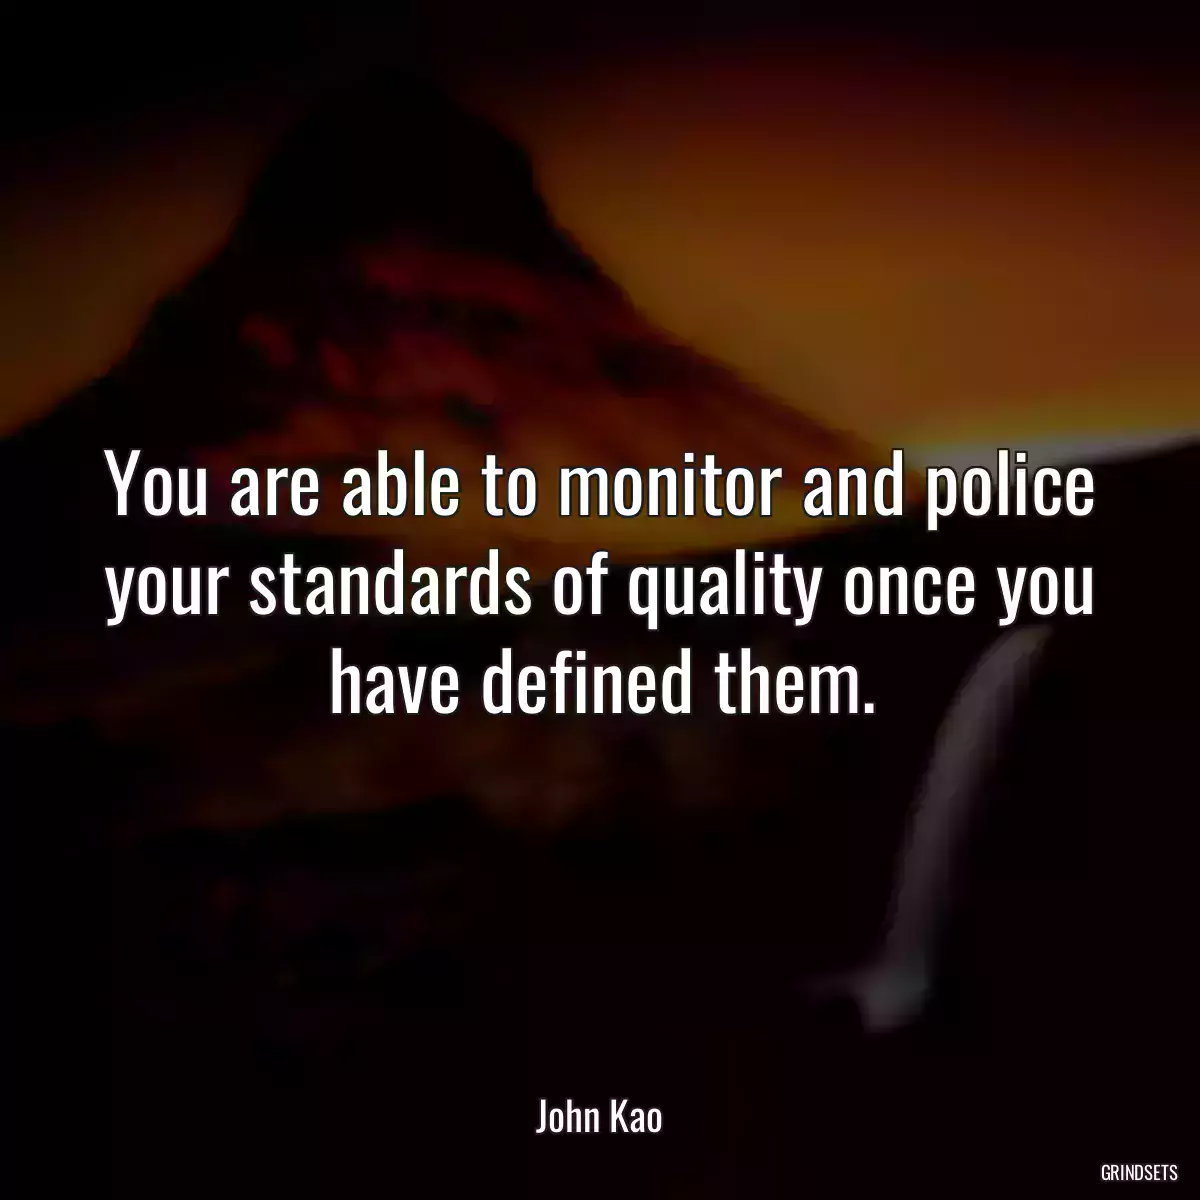 You are able to monitor and police your standards of quality once you have defined them.